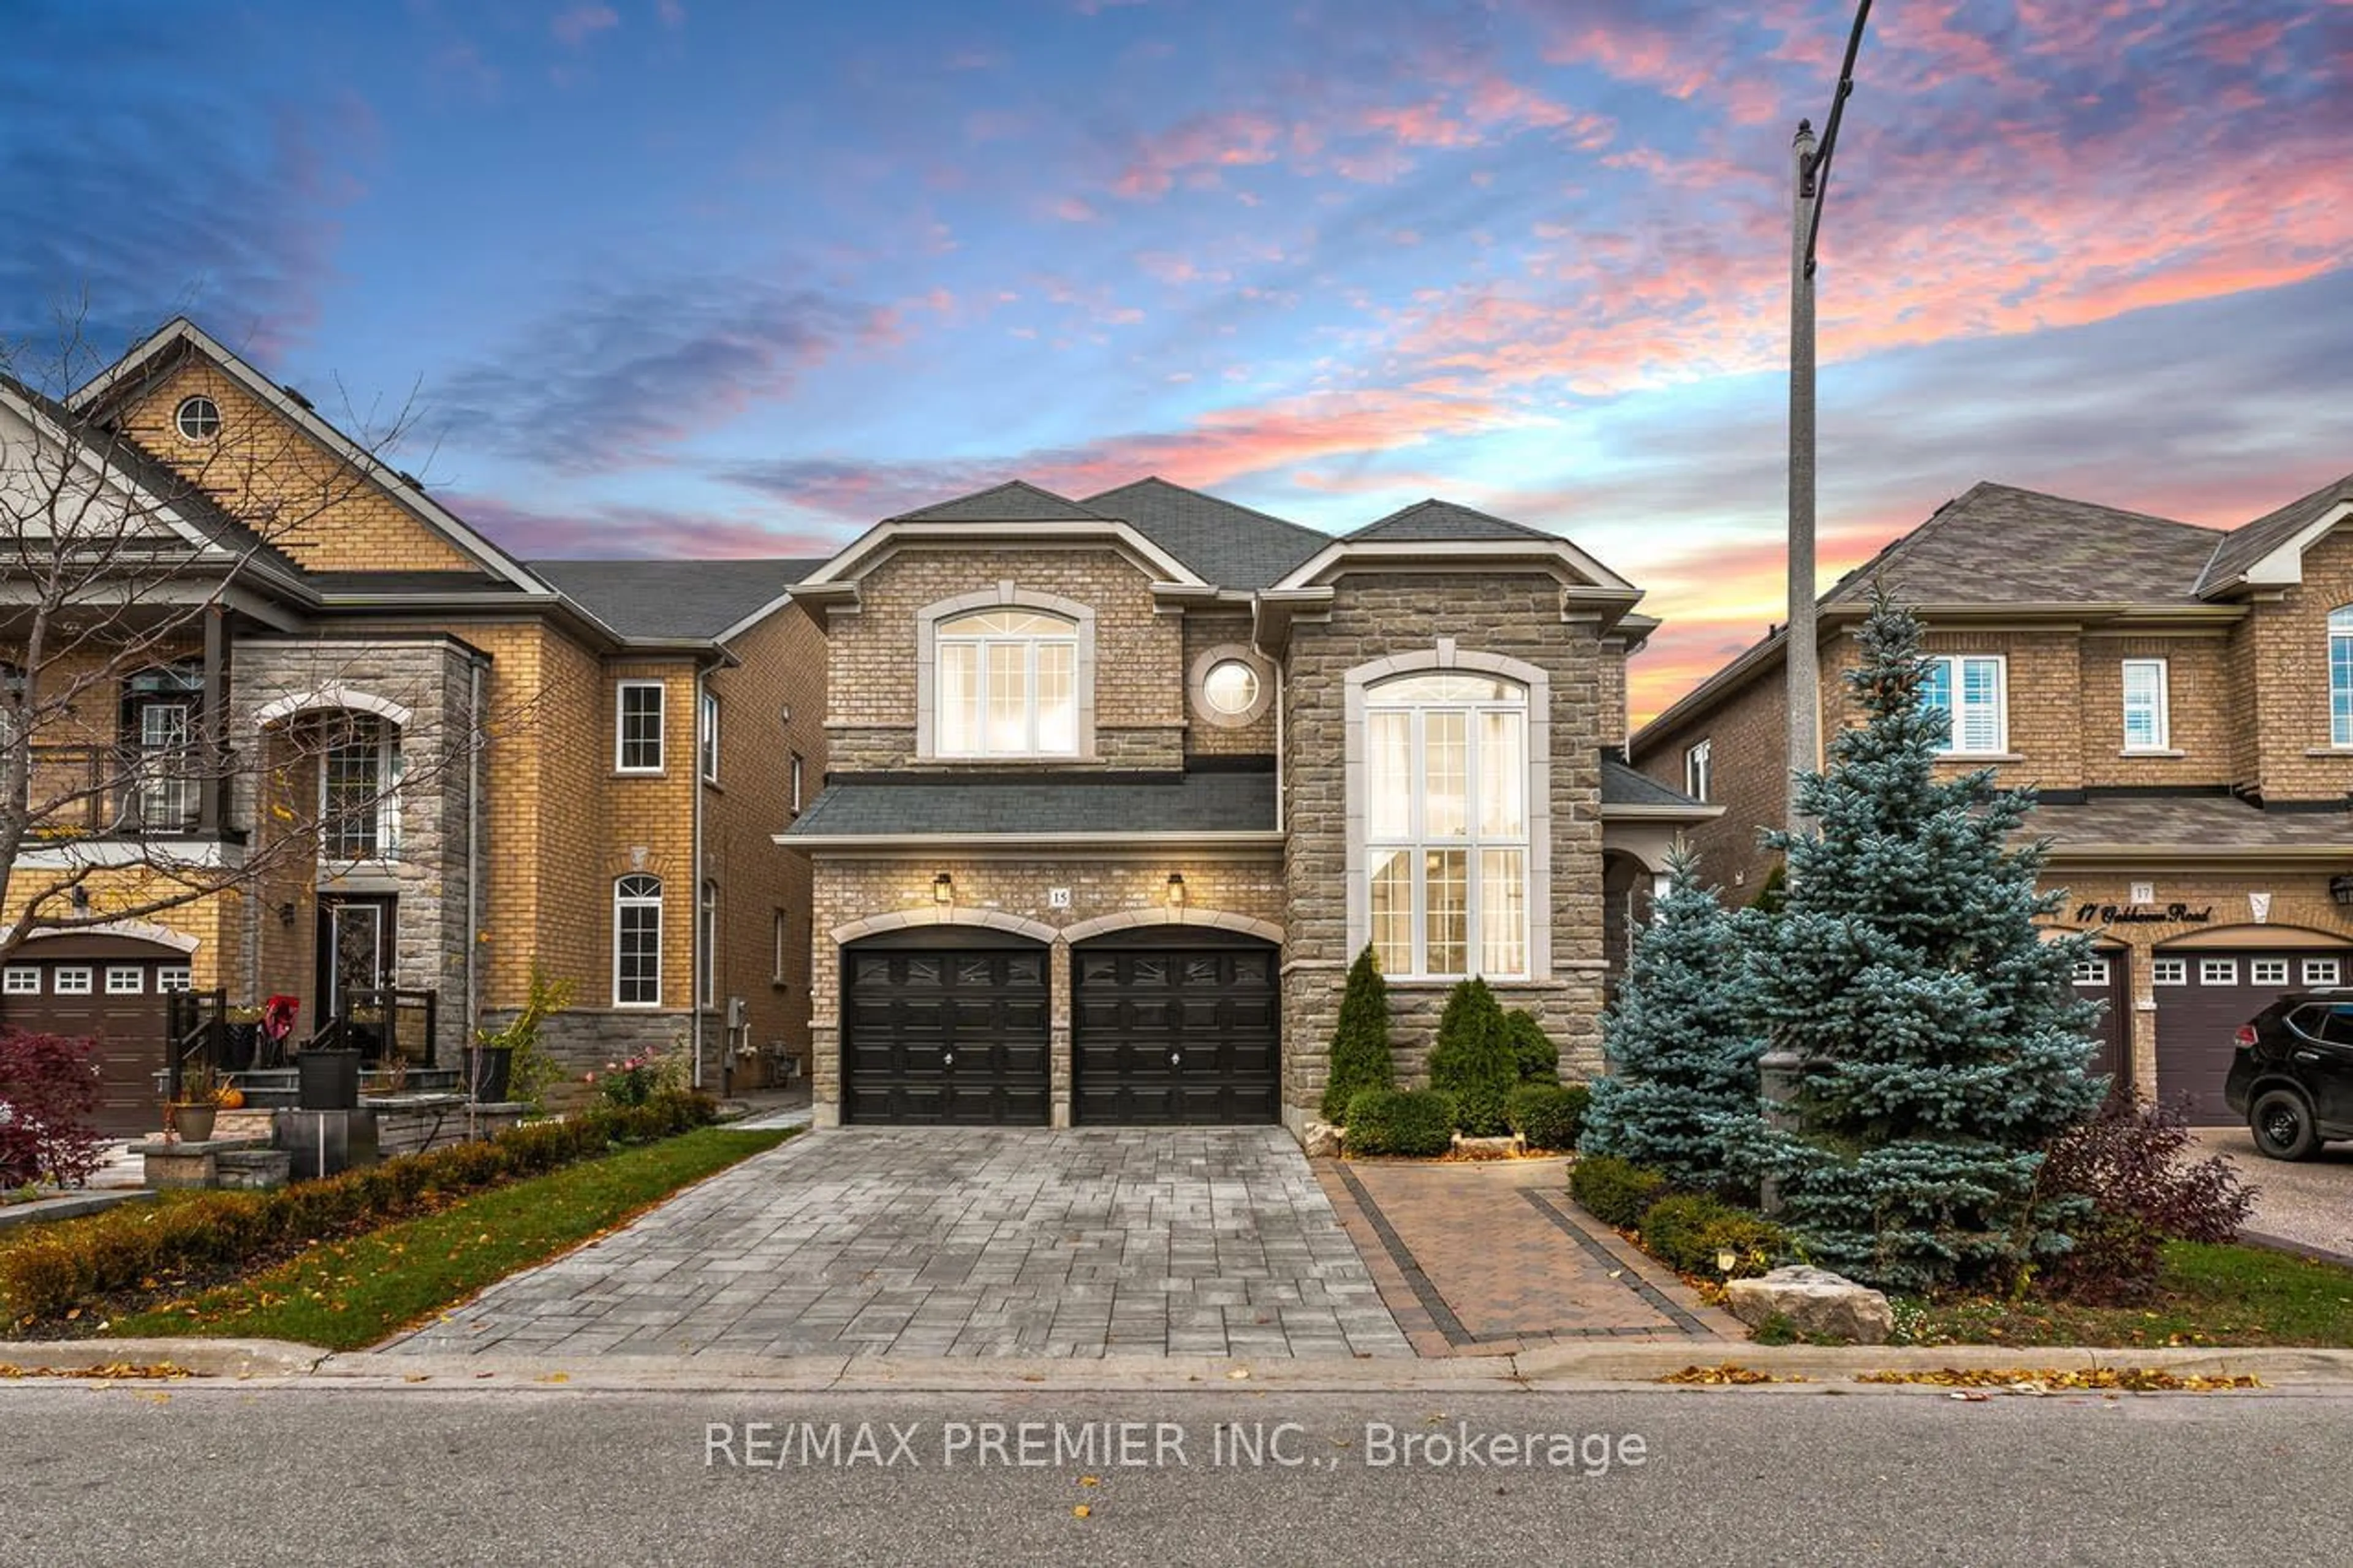 Home with brick exterior material for 15 Oakhaven Rd, Brampton Ontario L6P 2Y3